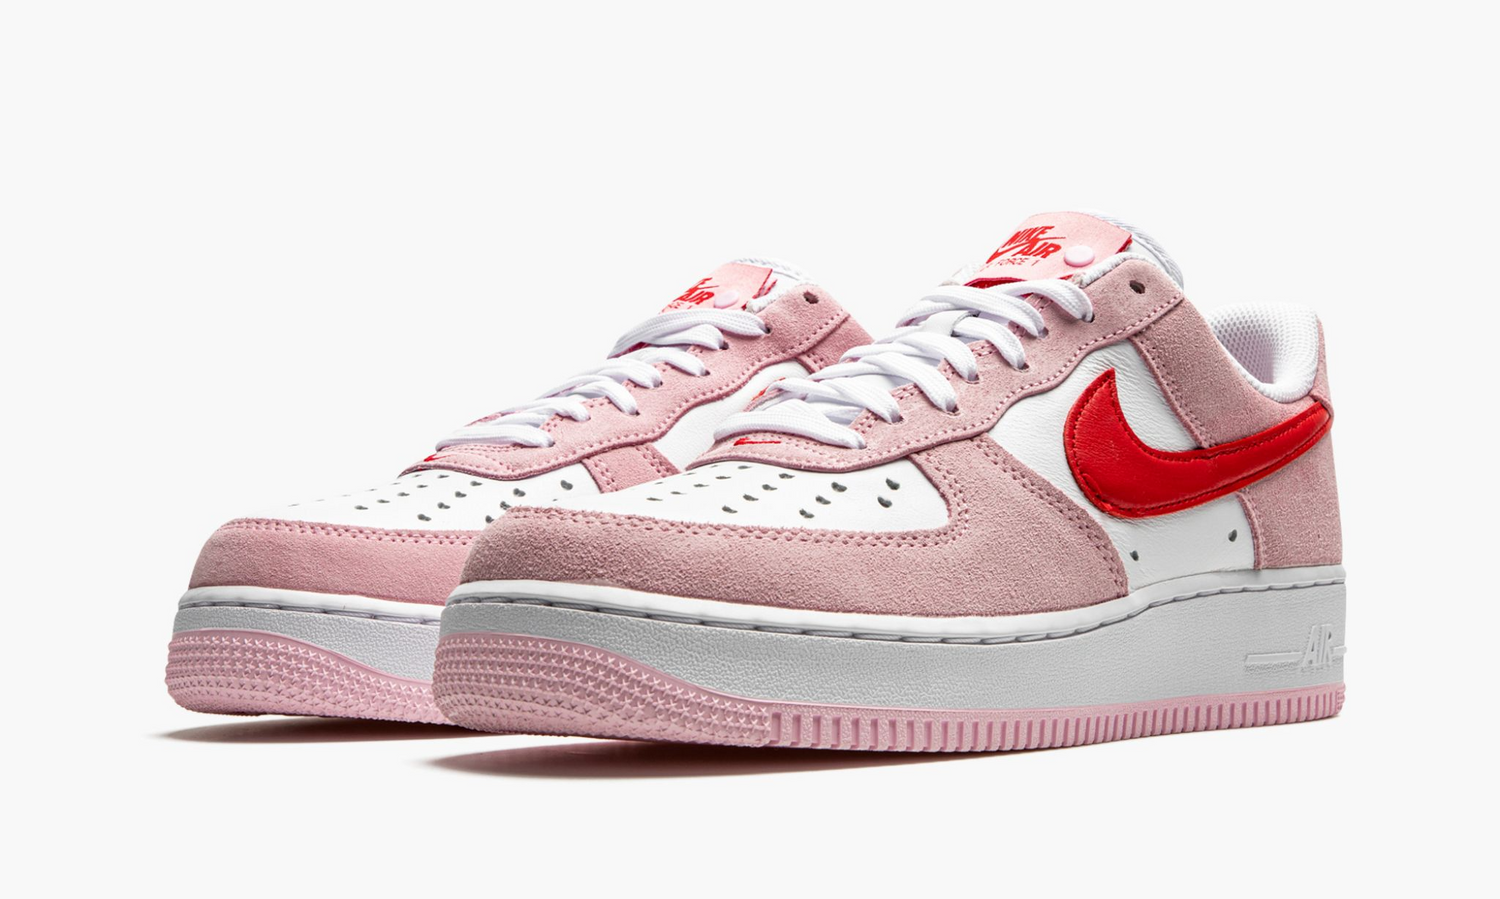 Nike air force low valentine s day. Nike Air Force Valentines Day 2021. Nike Air Force 1 Low Valentines Day 2021. Nike Air Force 1 Low Valentines Day. Nike Air Force 1 Low Valentine.